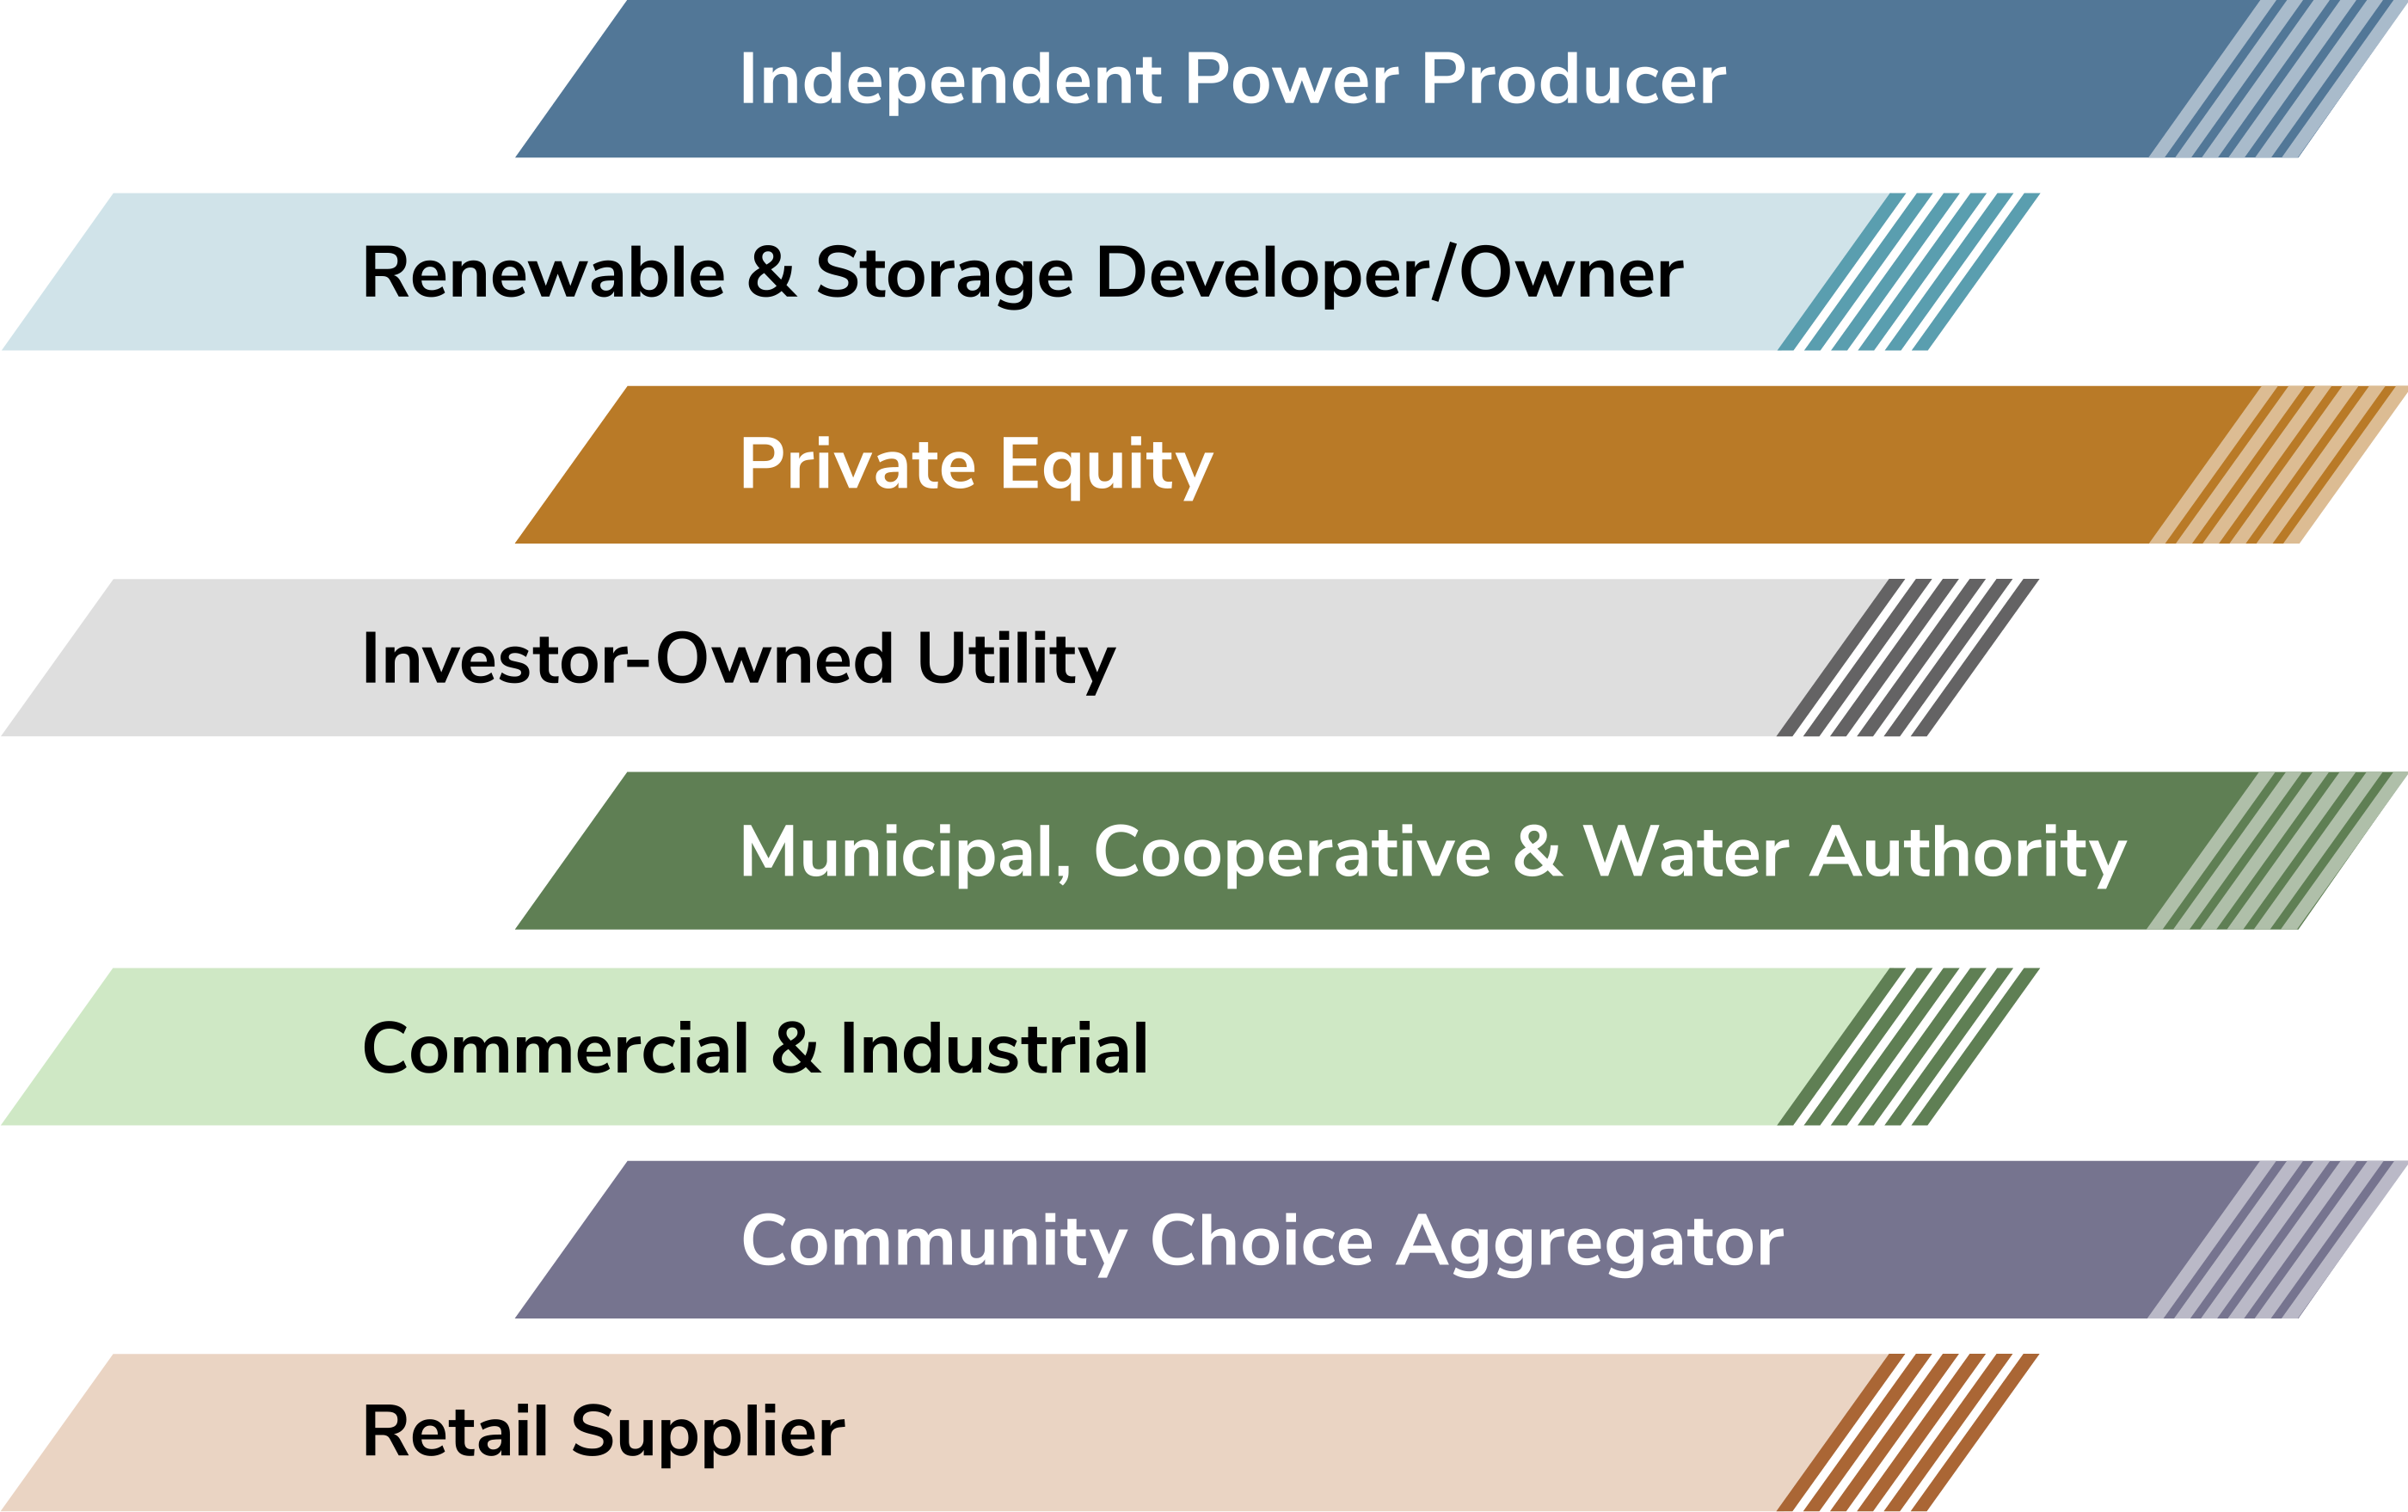 TPS customer types include Independent Power Producer; Renewable & Storage Developer/Owner; Private Equity; Investor-Owned Utility; Municipal, Cooperative & Water Authority; Commercial & Industrial; Community Choice Aggregator; and Retail Supplier.